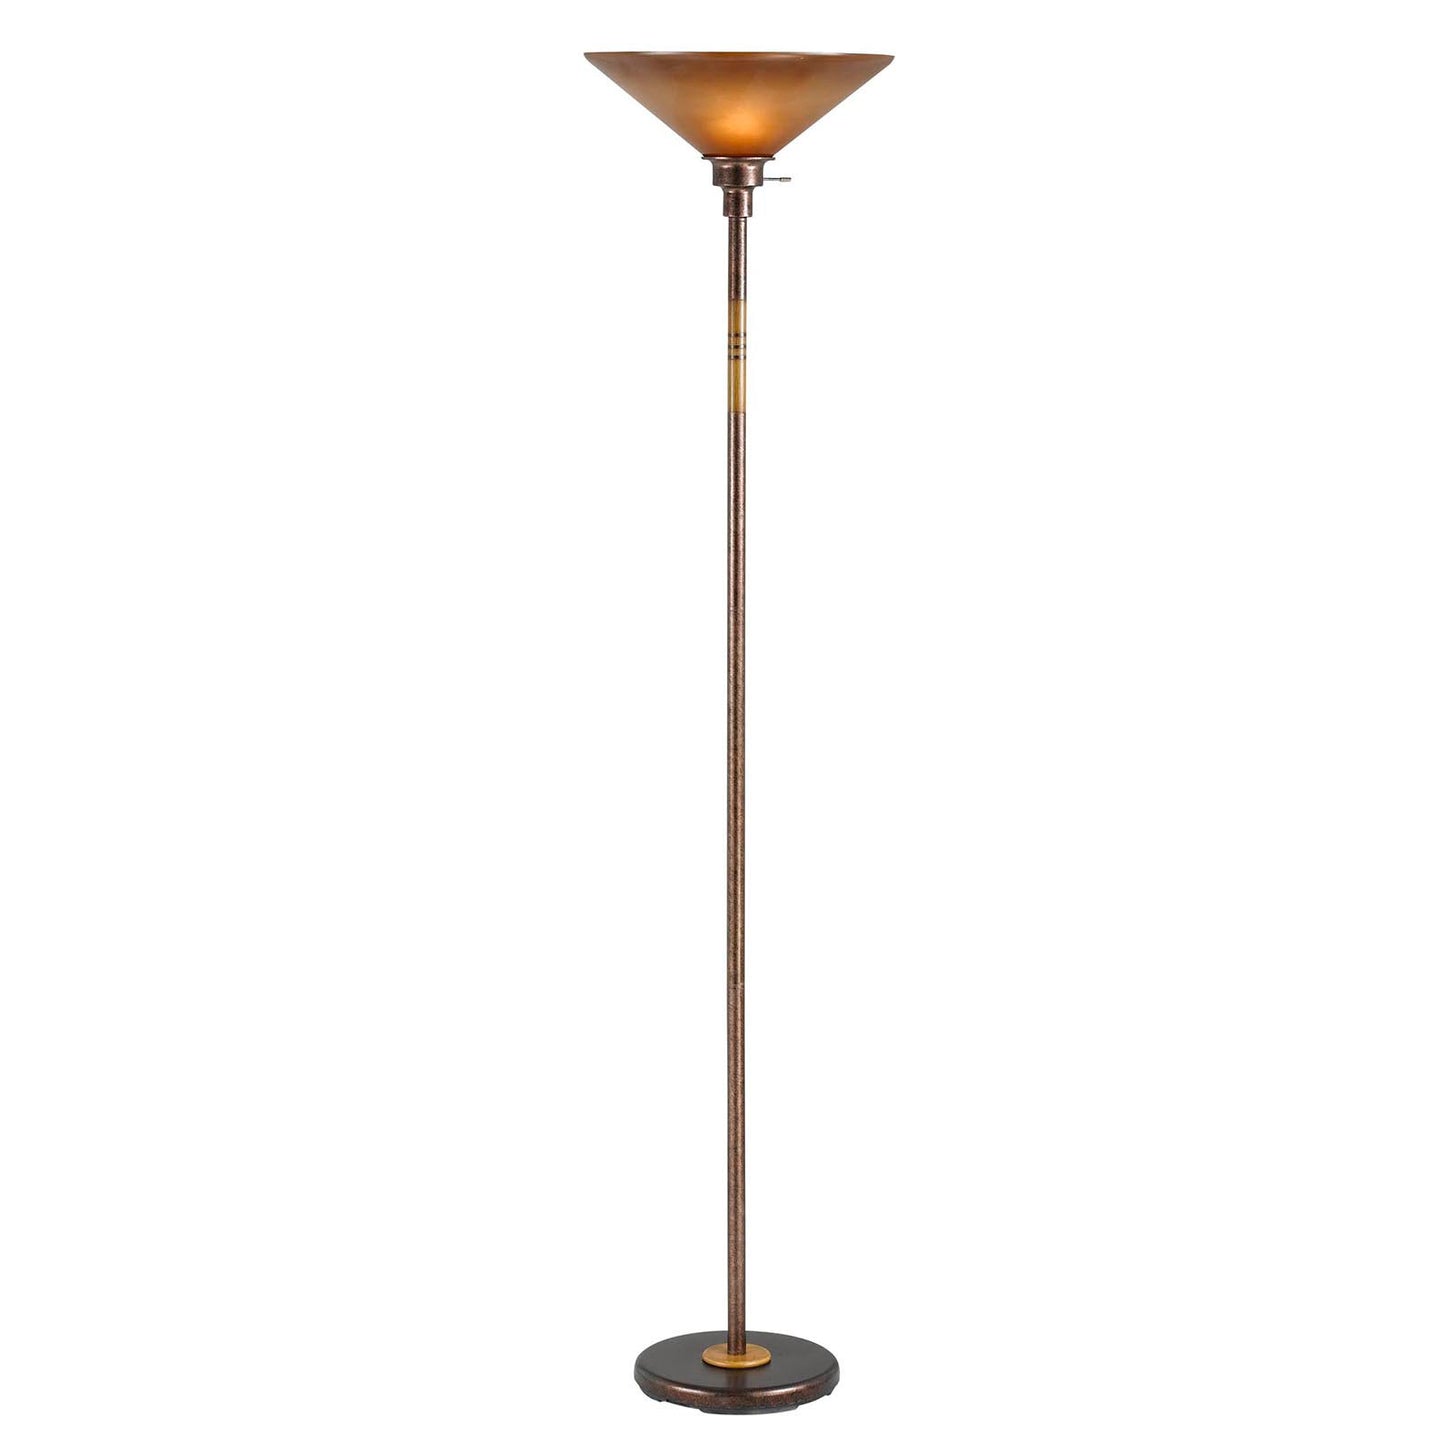 70" Rusted Torchiere Floor Lamp With Rust Frosted Glass Dome Shade